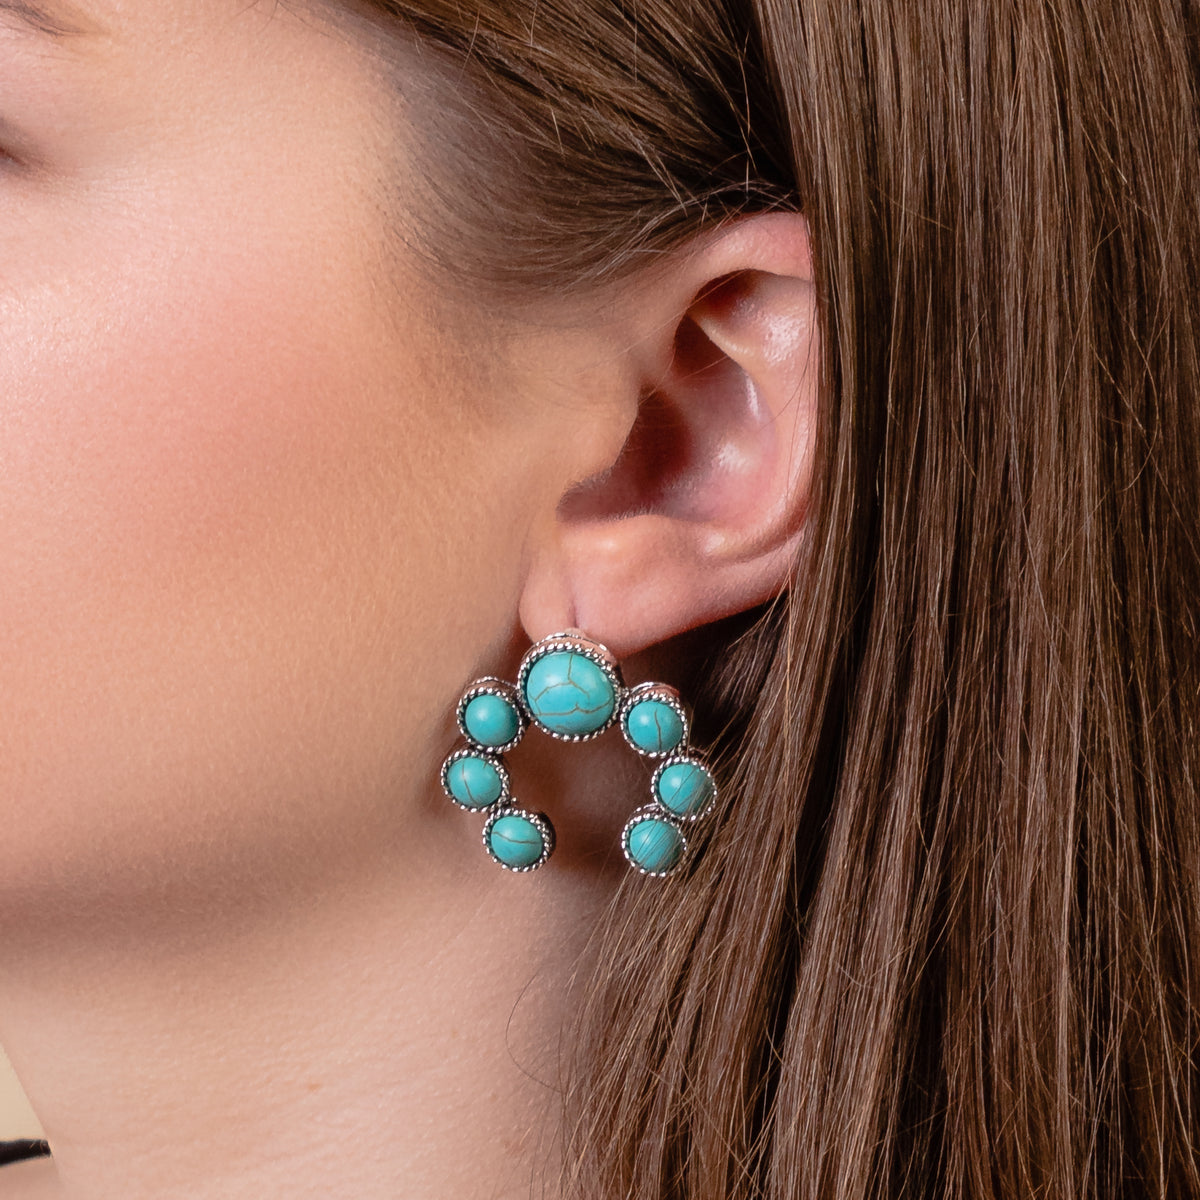 93180 - Squash Blossom Earrings - Turquoise & Silver